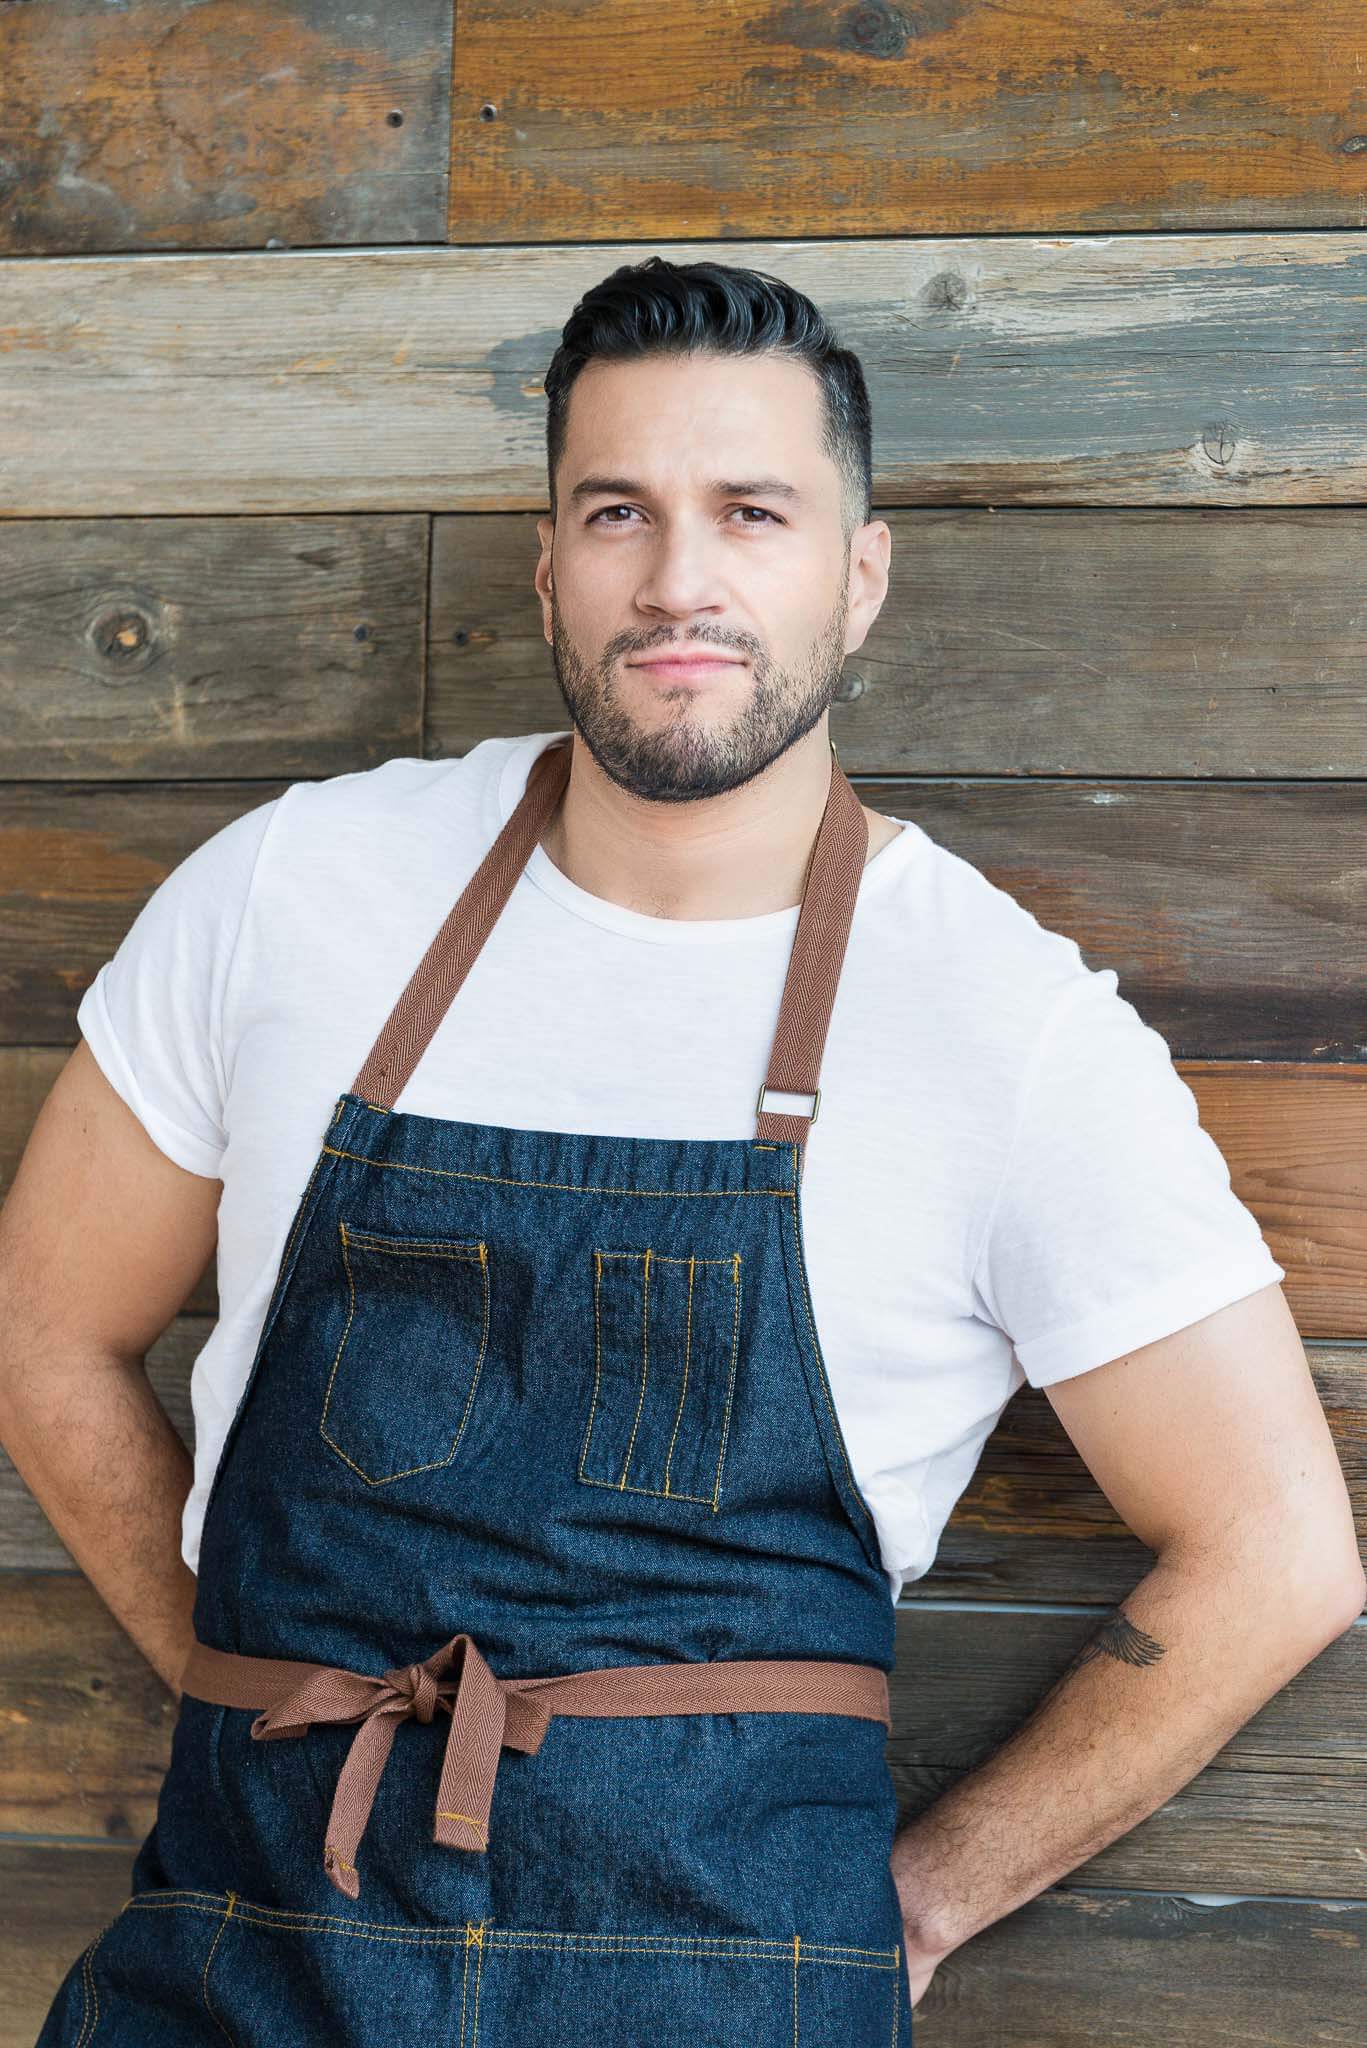 A chef in apron leans against wooden boards